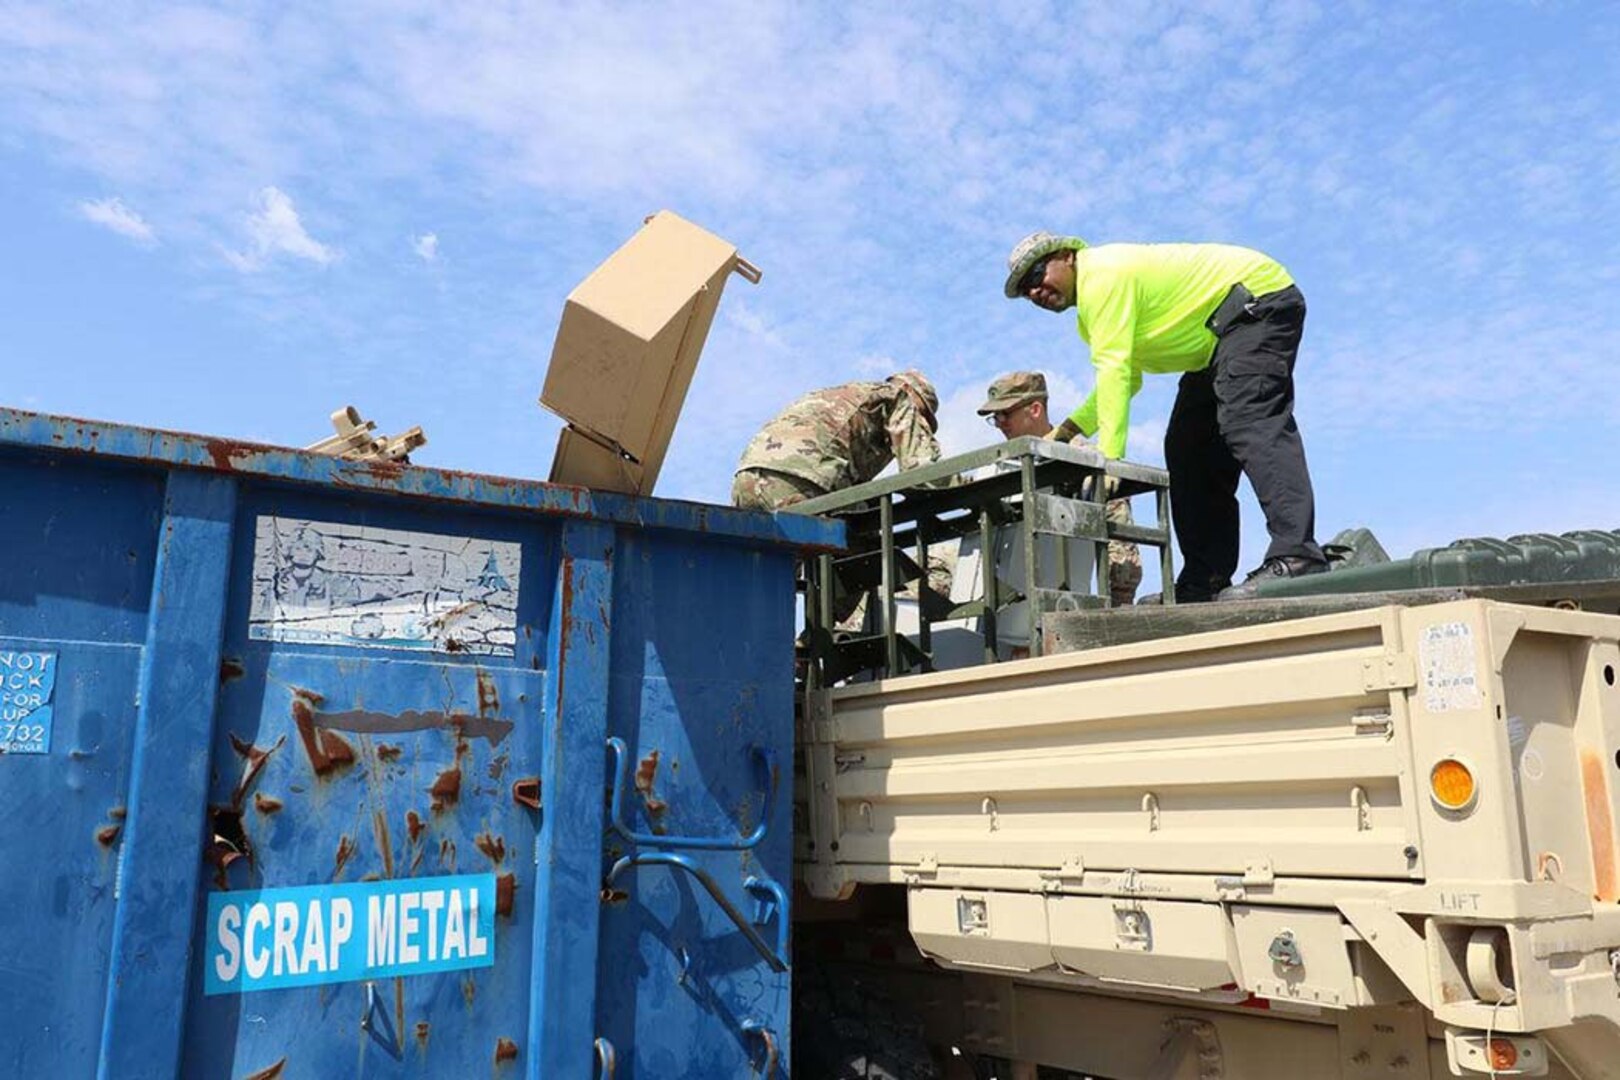 Everett Estell, material handler, Fort Hood Recycle, helps Soldiers recycle unserviceable military equipment, which will generate revenue for the installation’s recycle program.